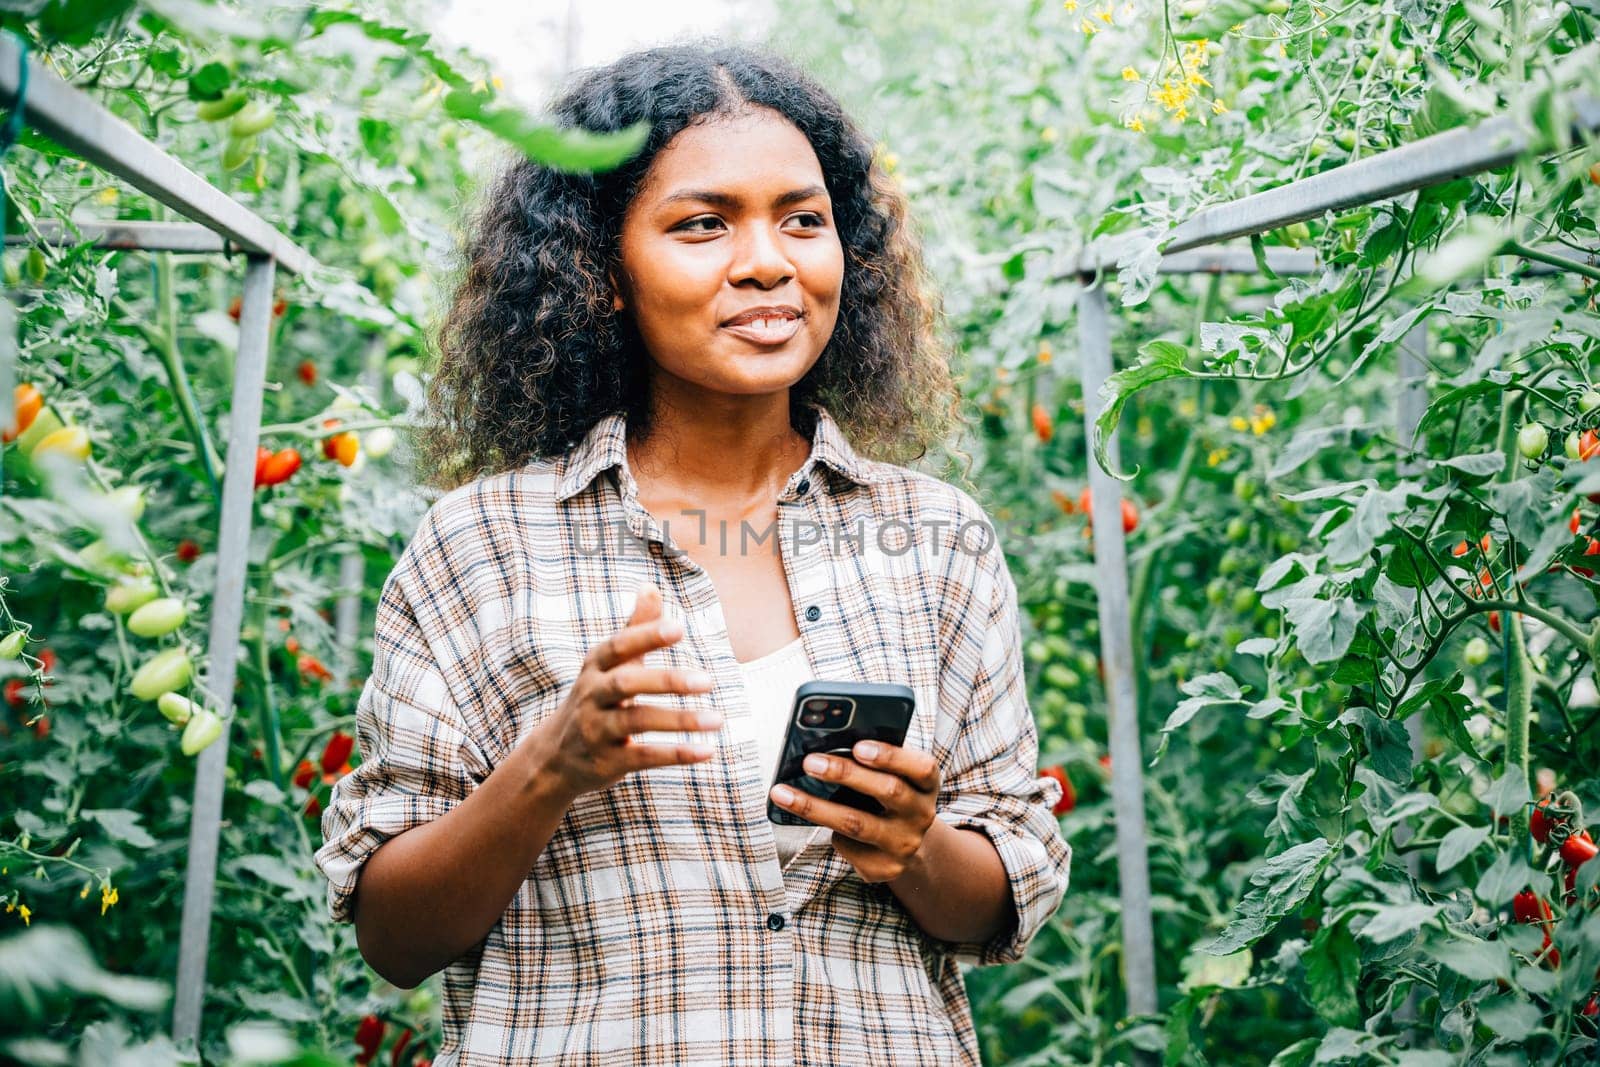 Greenhouse owner, smiling woman, talks on phone, holding tomatoes. Business communication for farm orders. Nature's growth, modern technology connect.